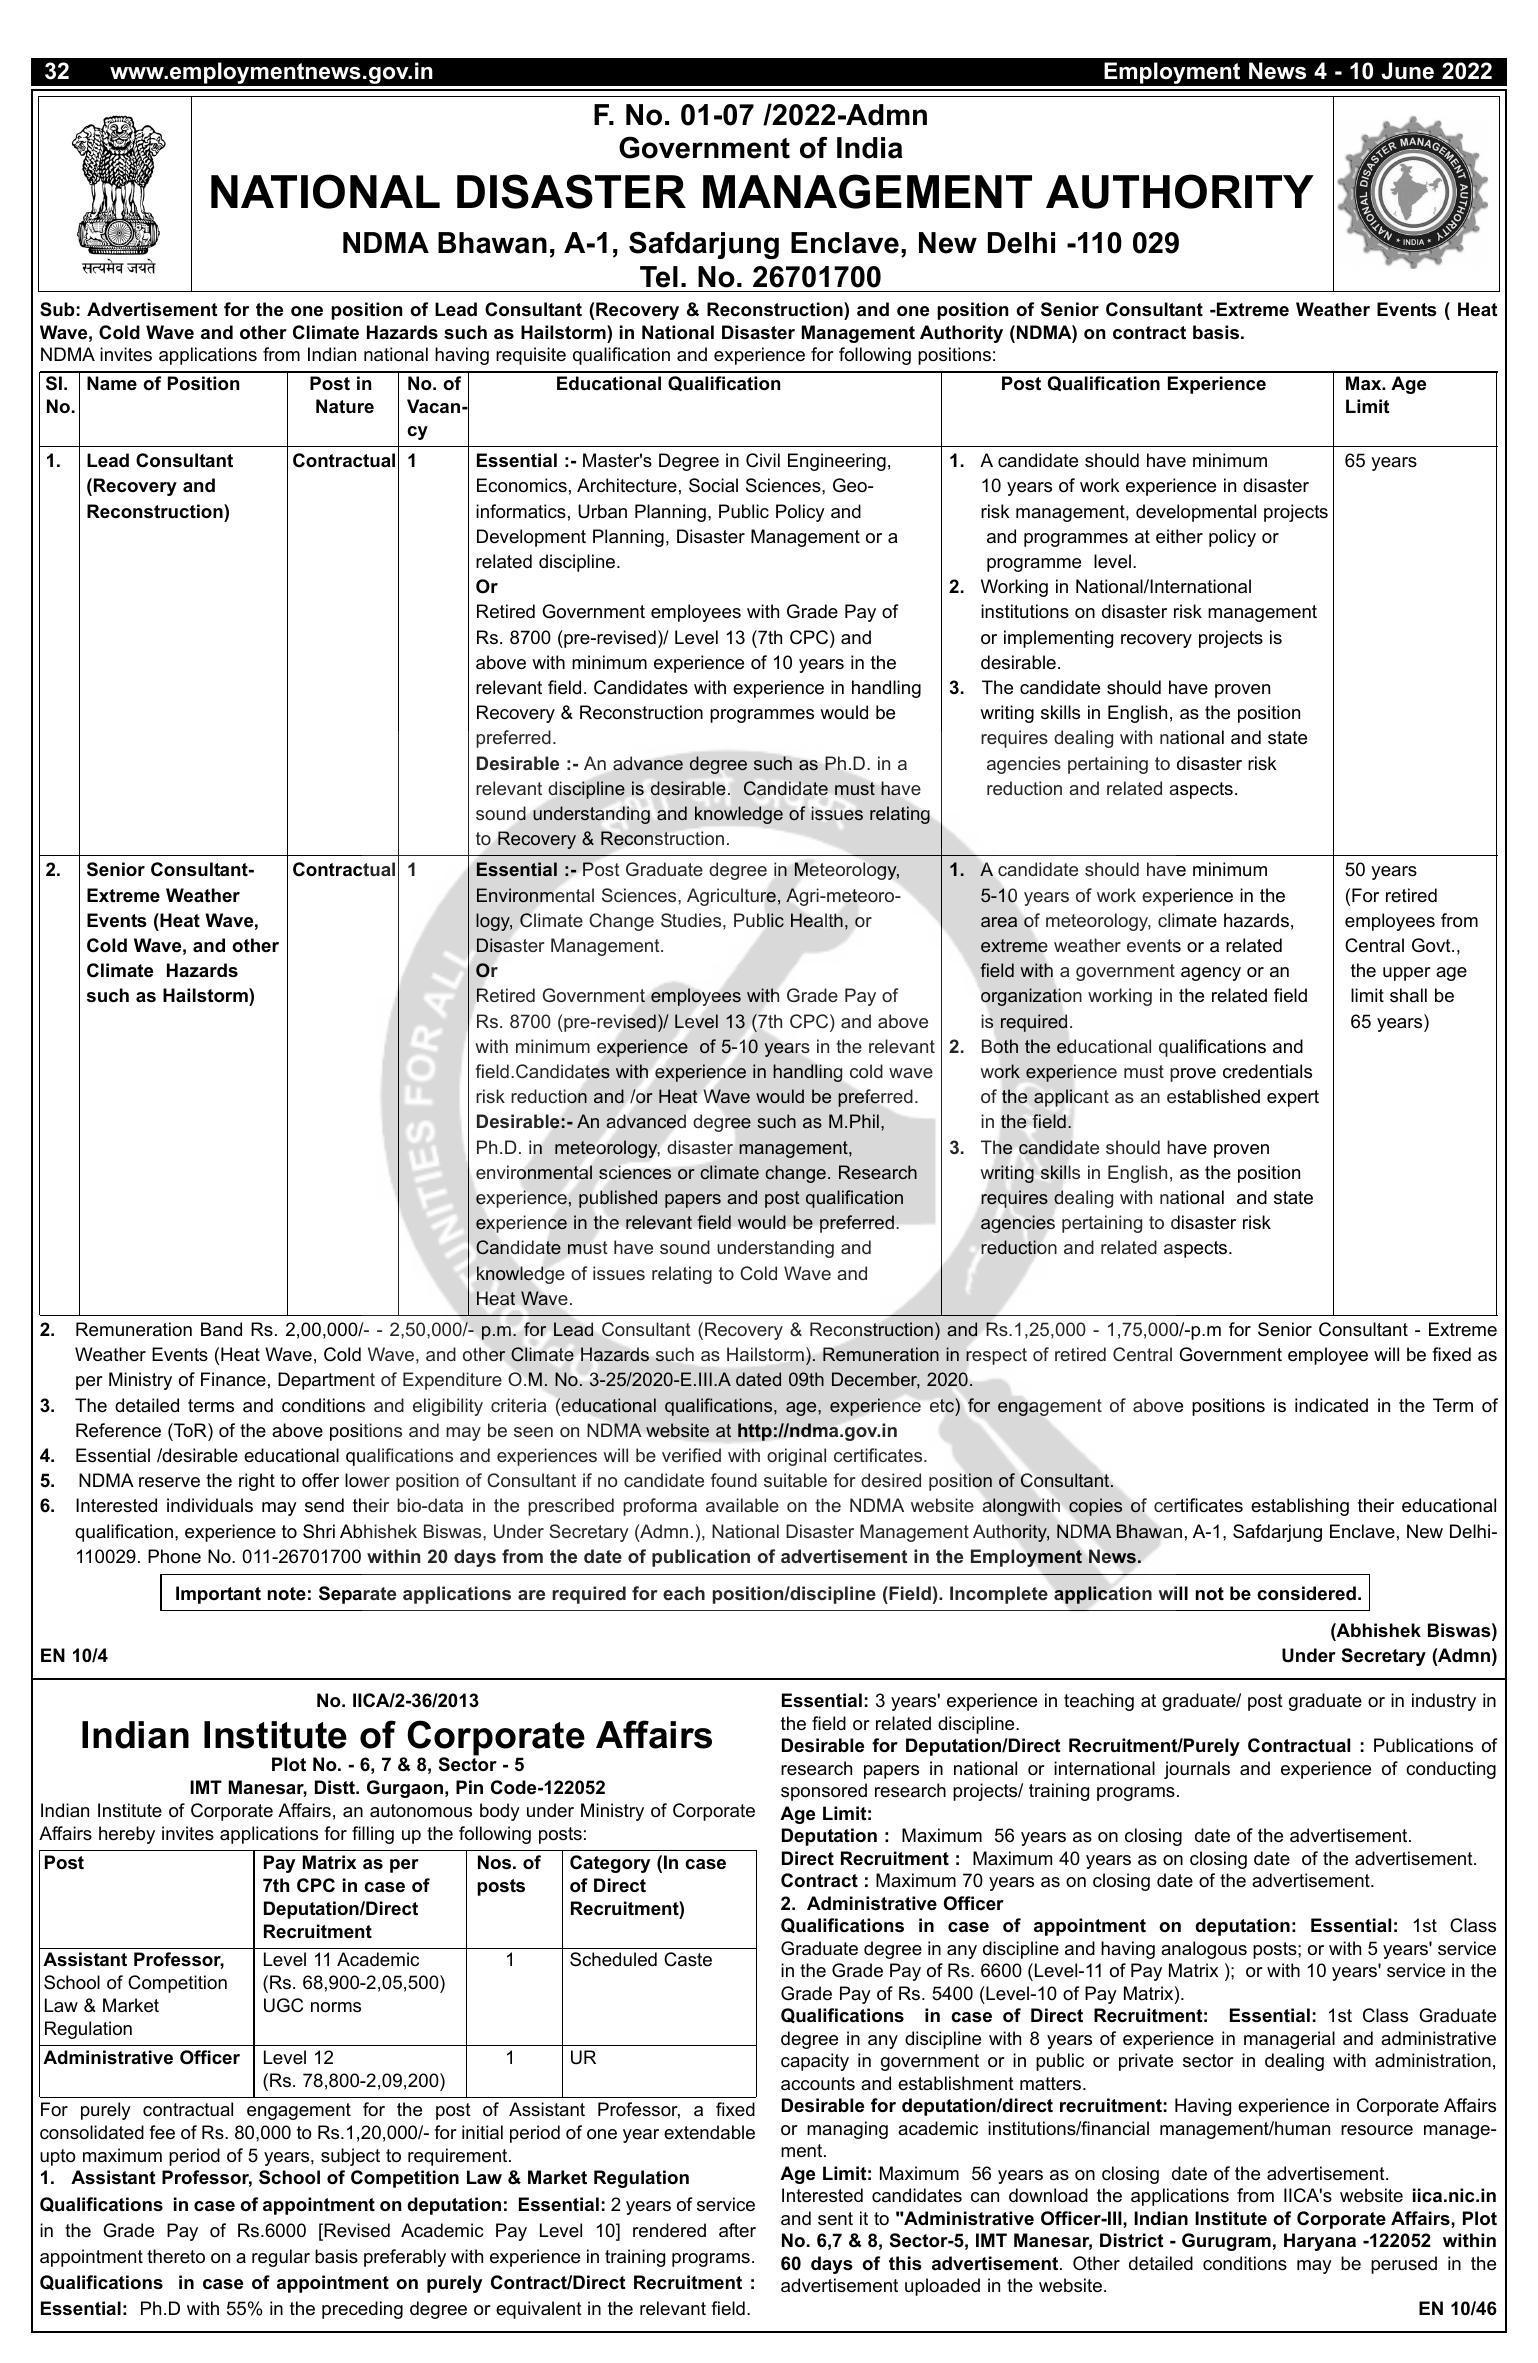 Indian Institute of Corporate Affairs (IICA) Assistant Professor, Administrative Officer Recruitment 2022 - Page 1